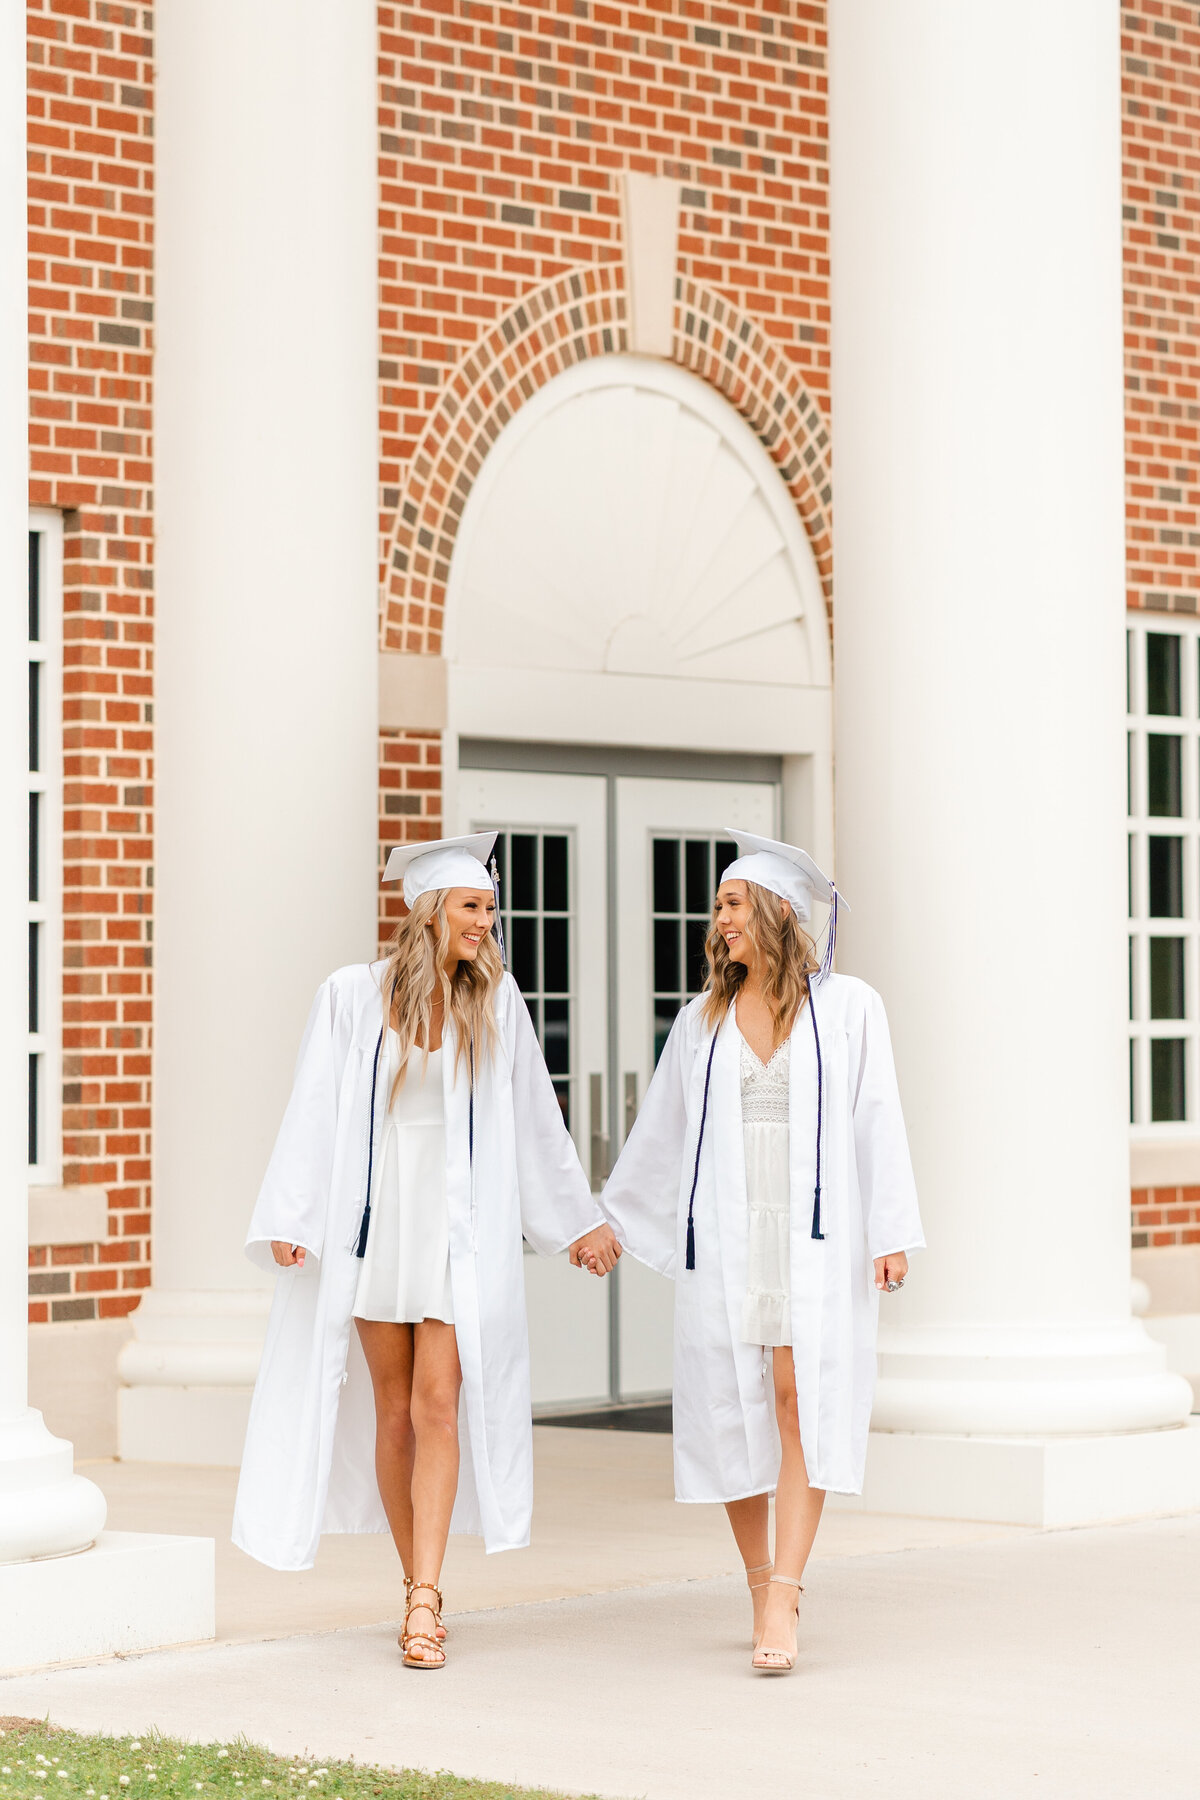 Kelley Hoagland is a Chattanooga senior photographer taking cap and gown portraits on location at Gordon Lee High School.  Graduates posed walking.